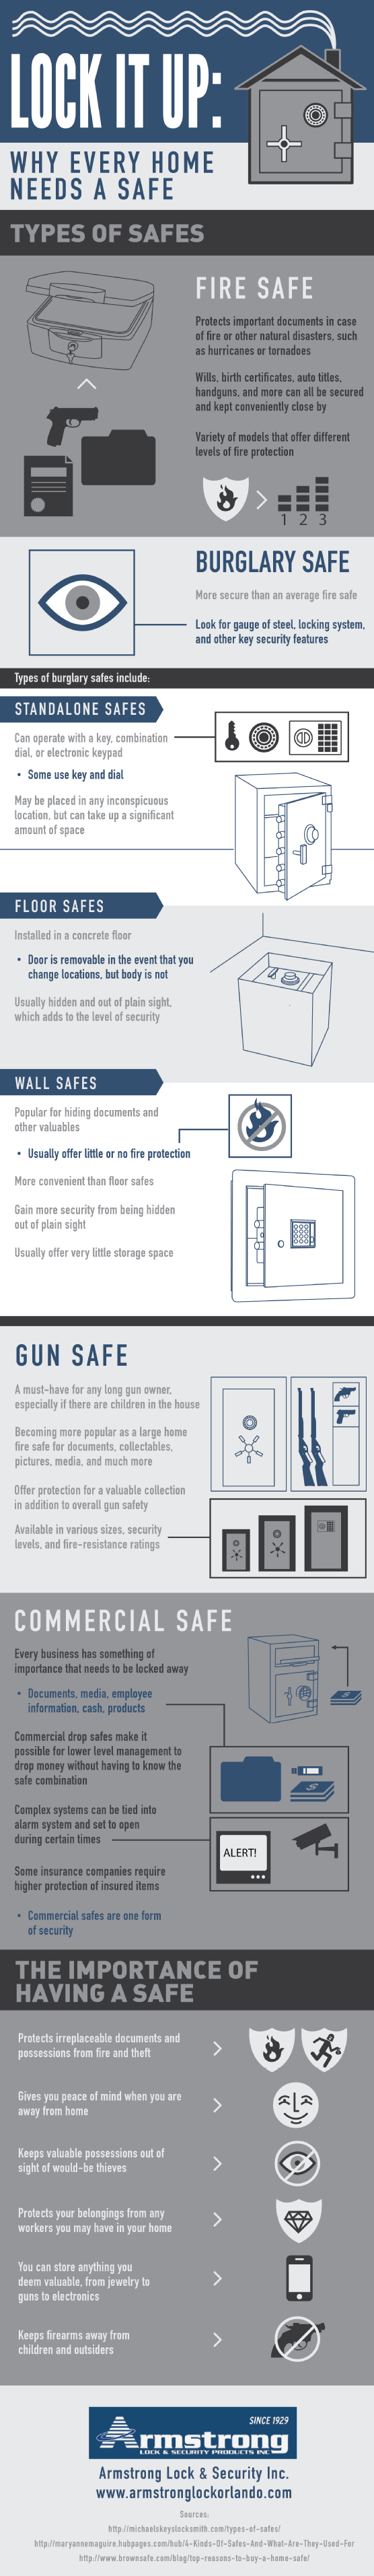 Why You Should Have a Safe in Your Home Infographic